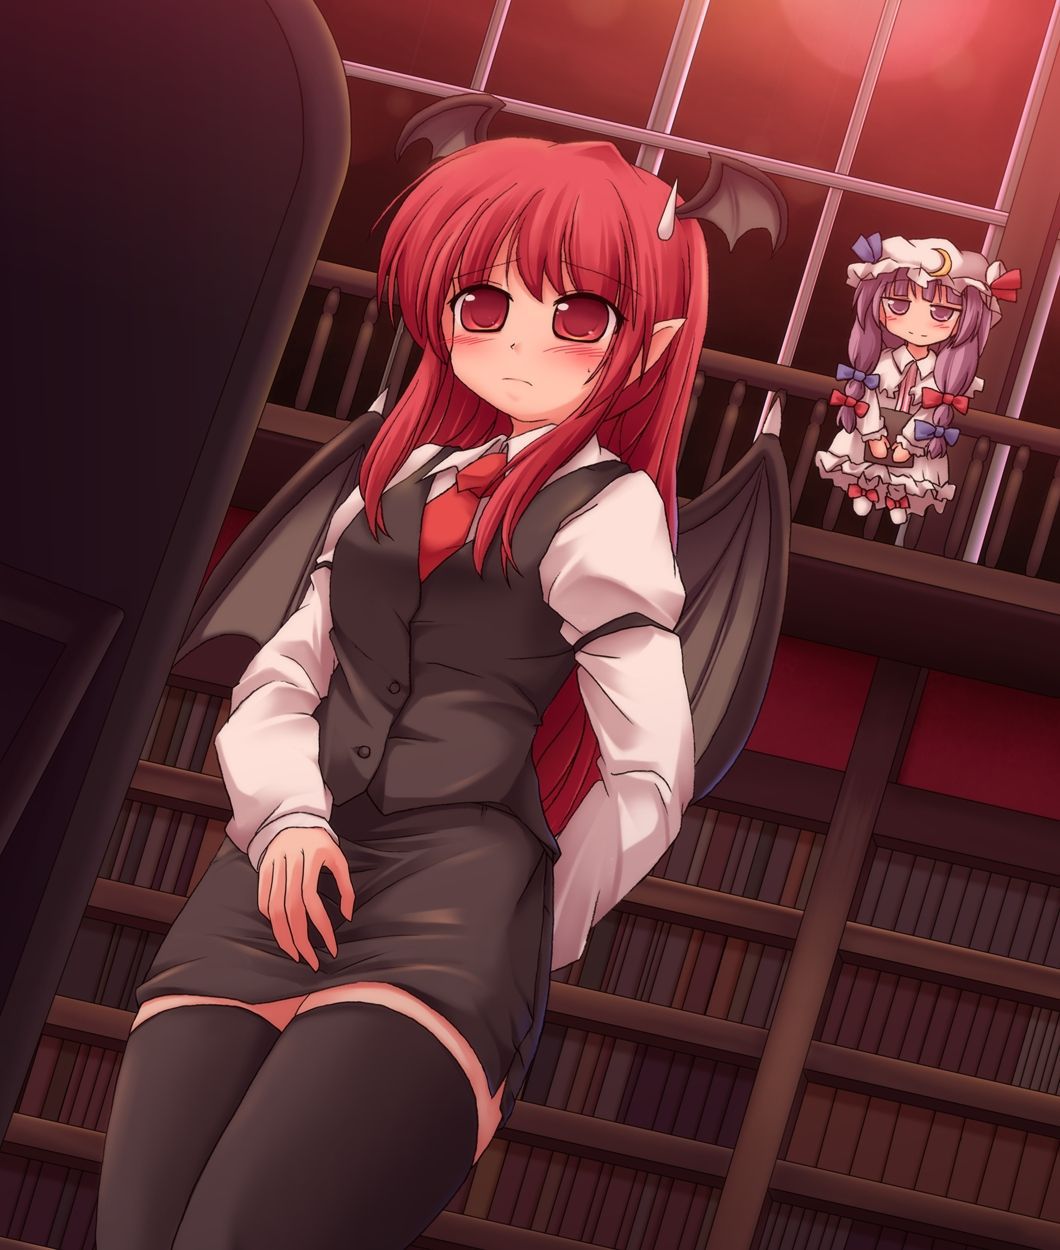 In The Library 2